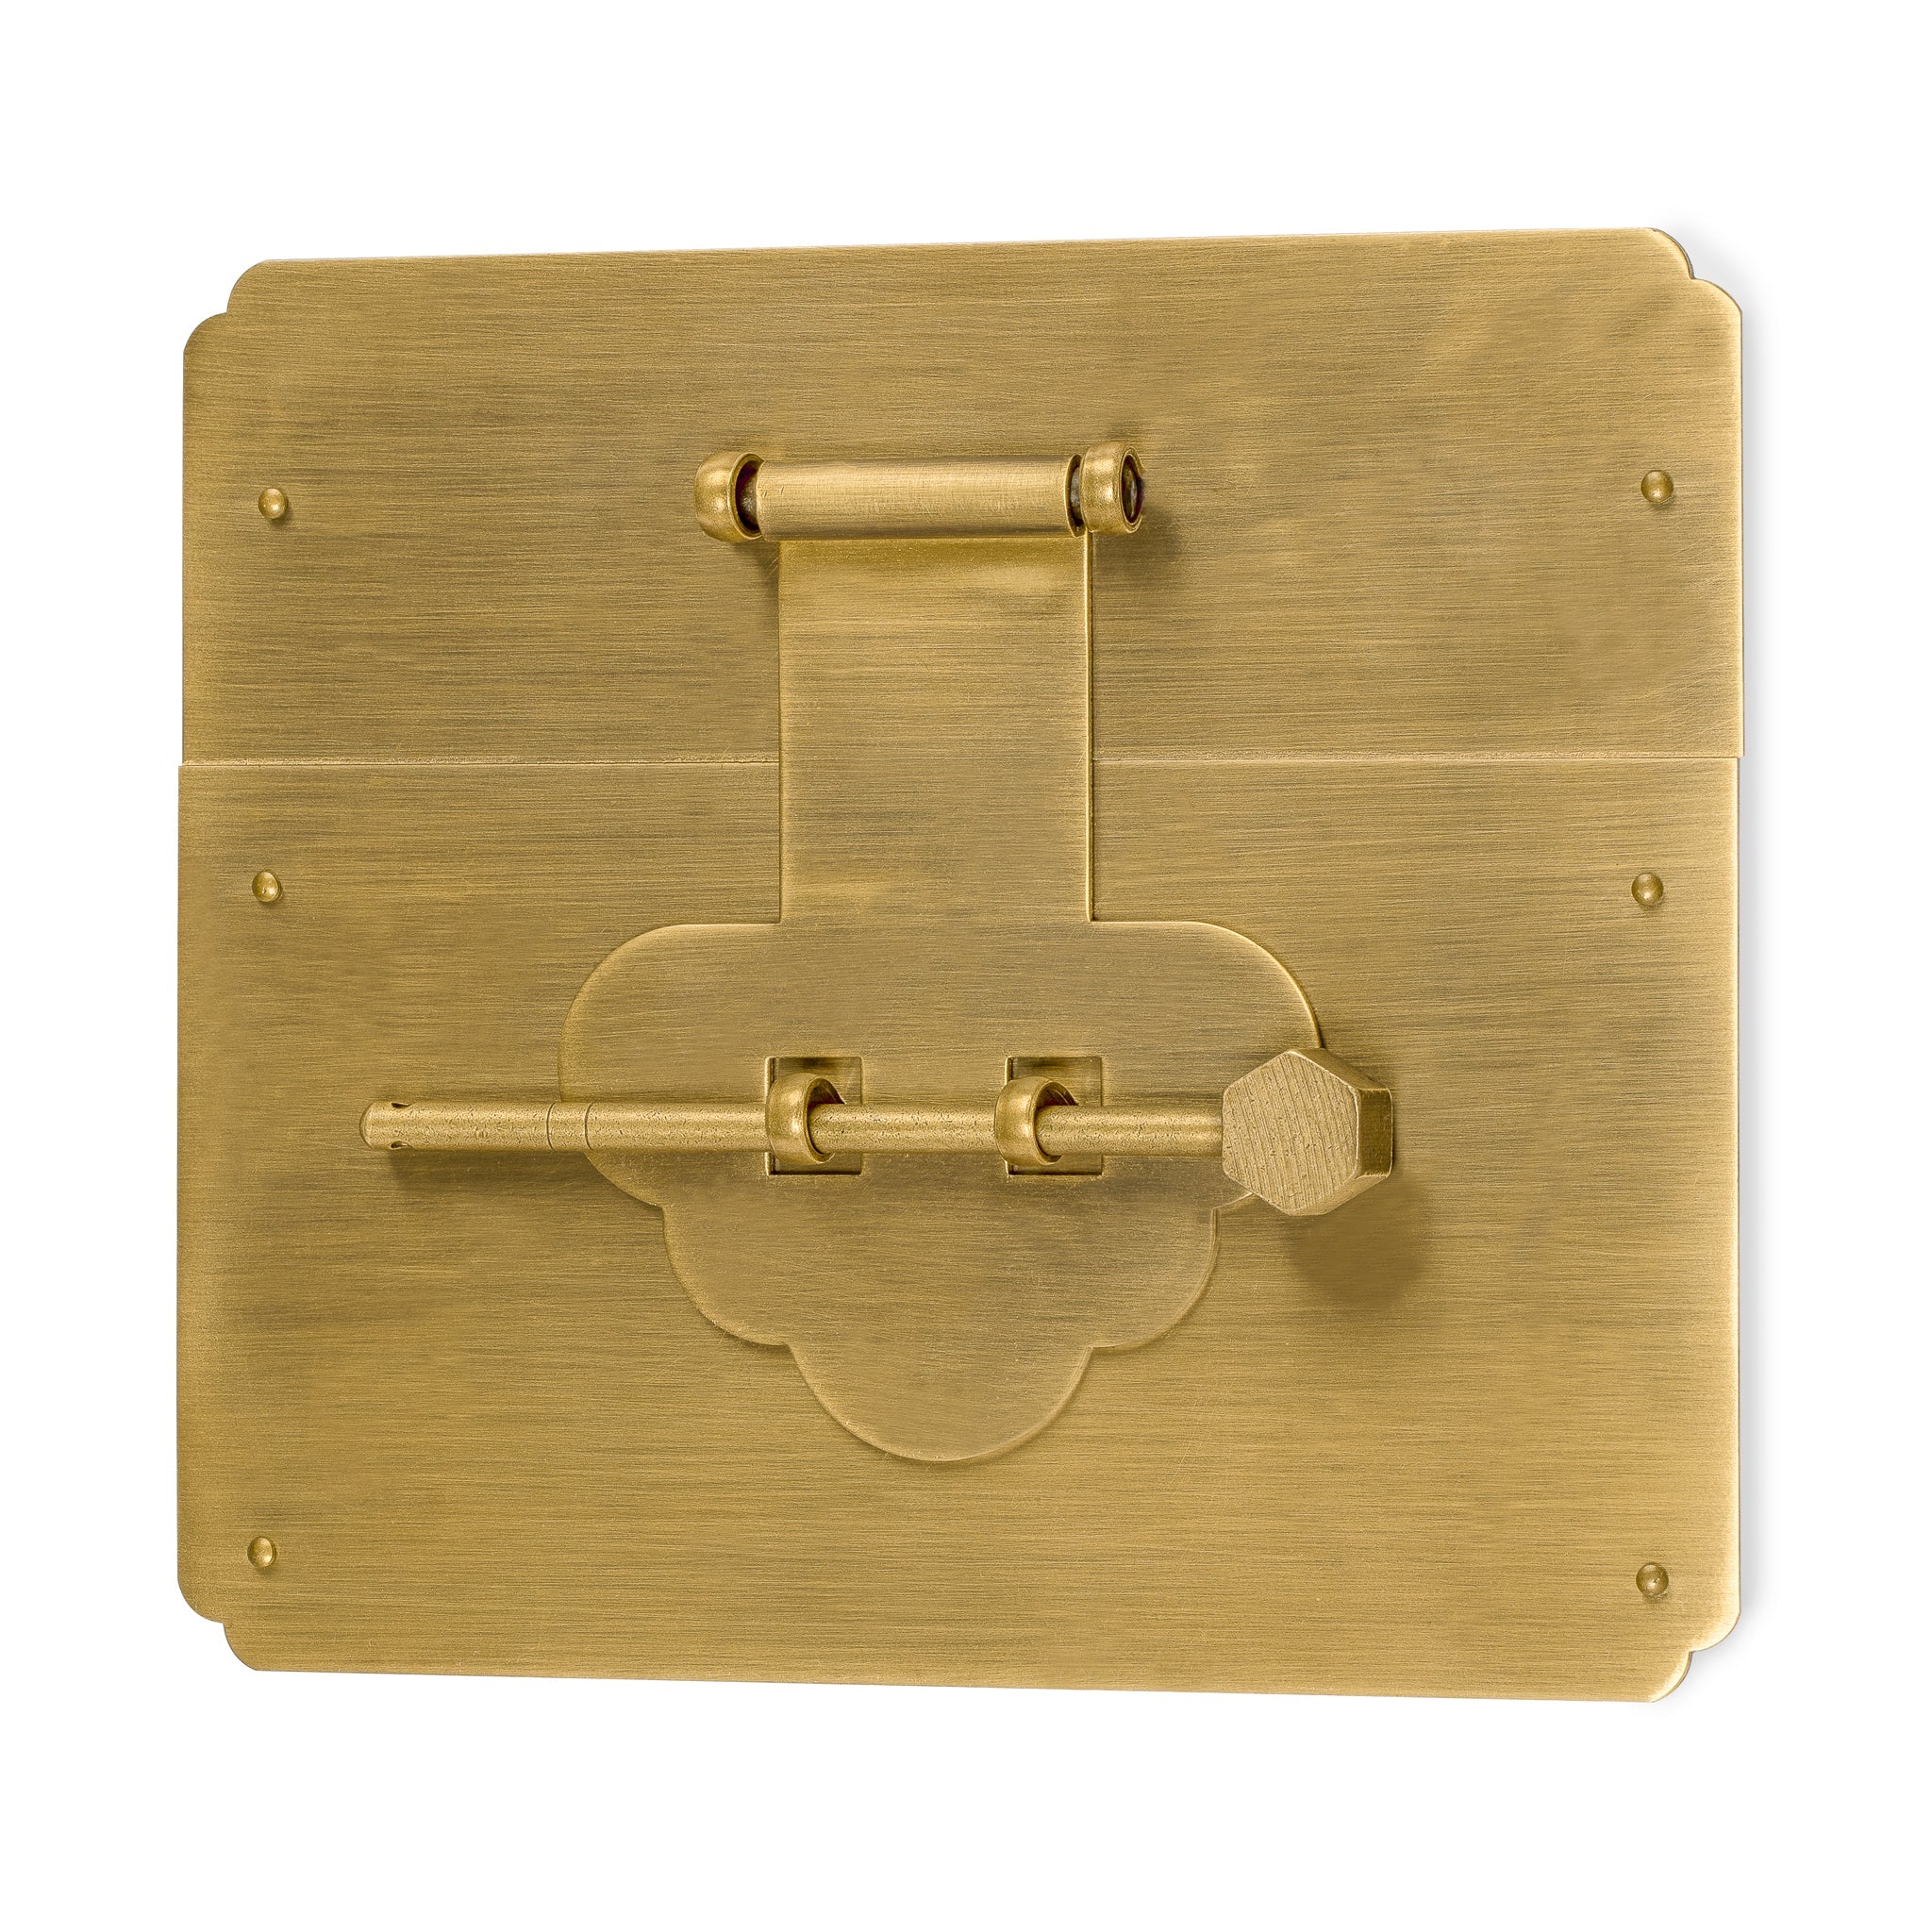 Mushroom Square Chest Box Face Plate Latch (5.5"x 6.5")-Chinese Brass Hardware